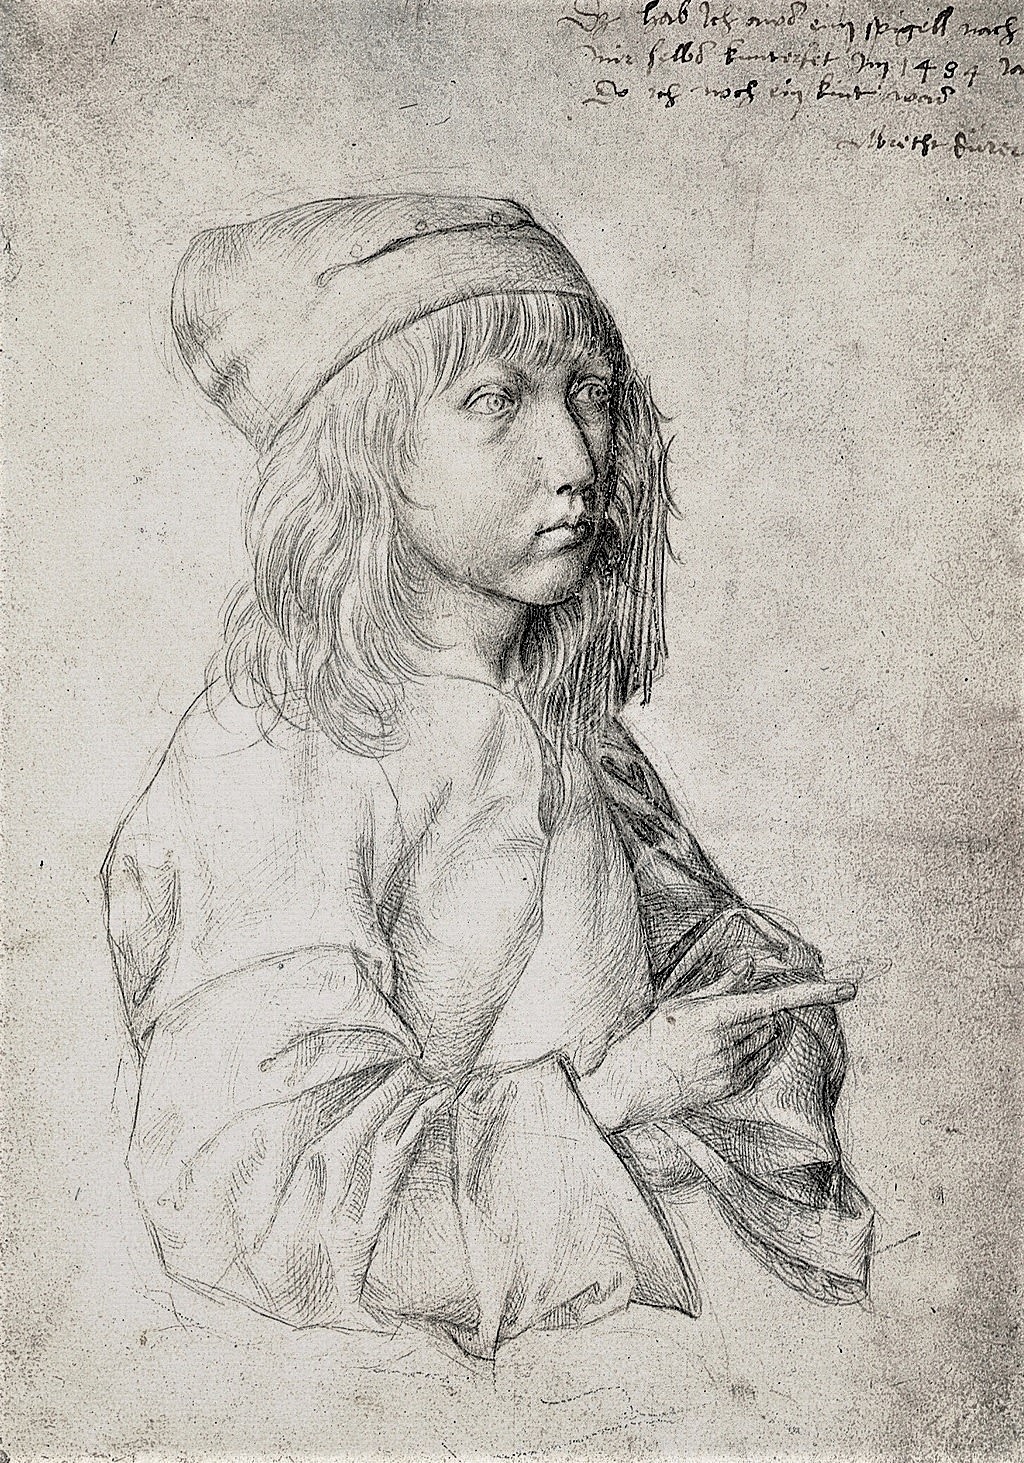 Collections of Drawings antique (11327).jpg